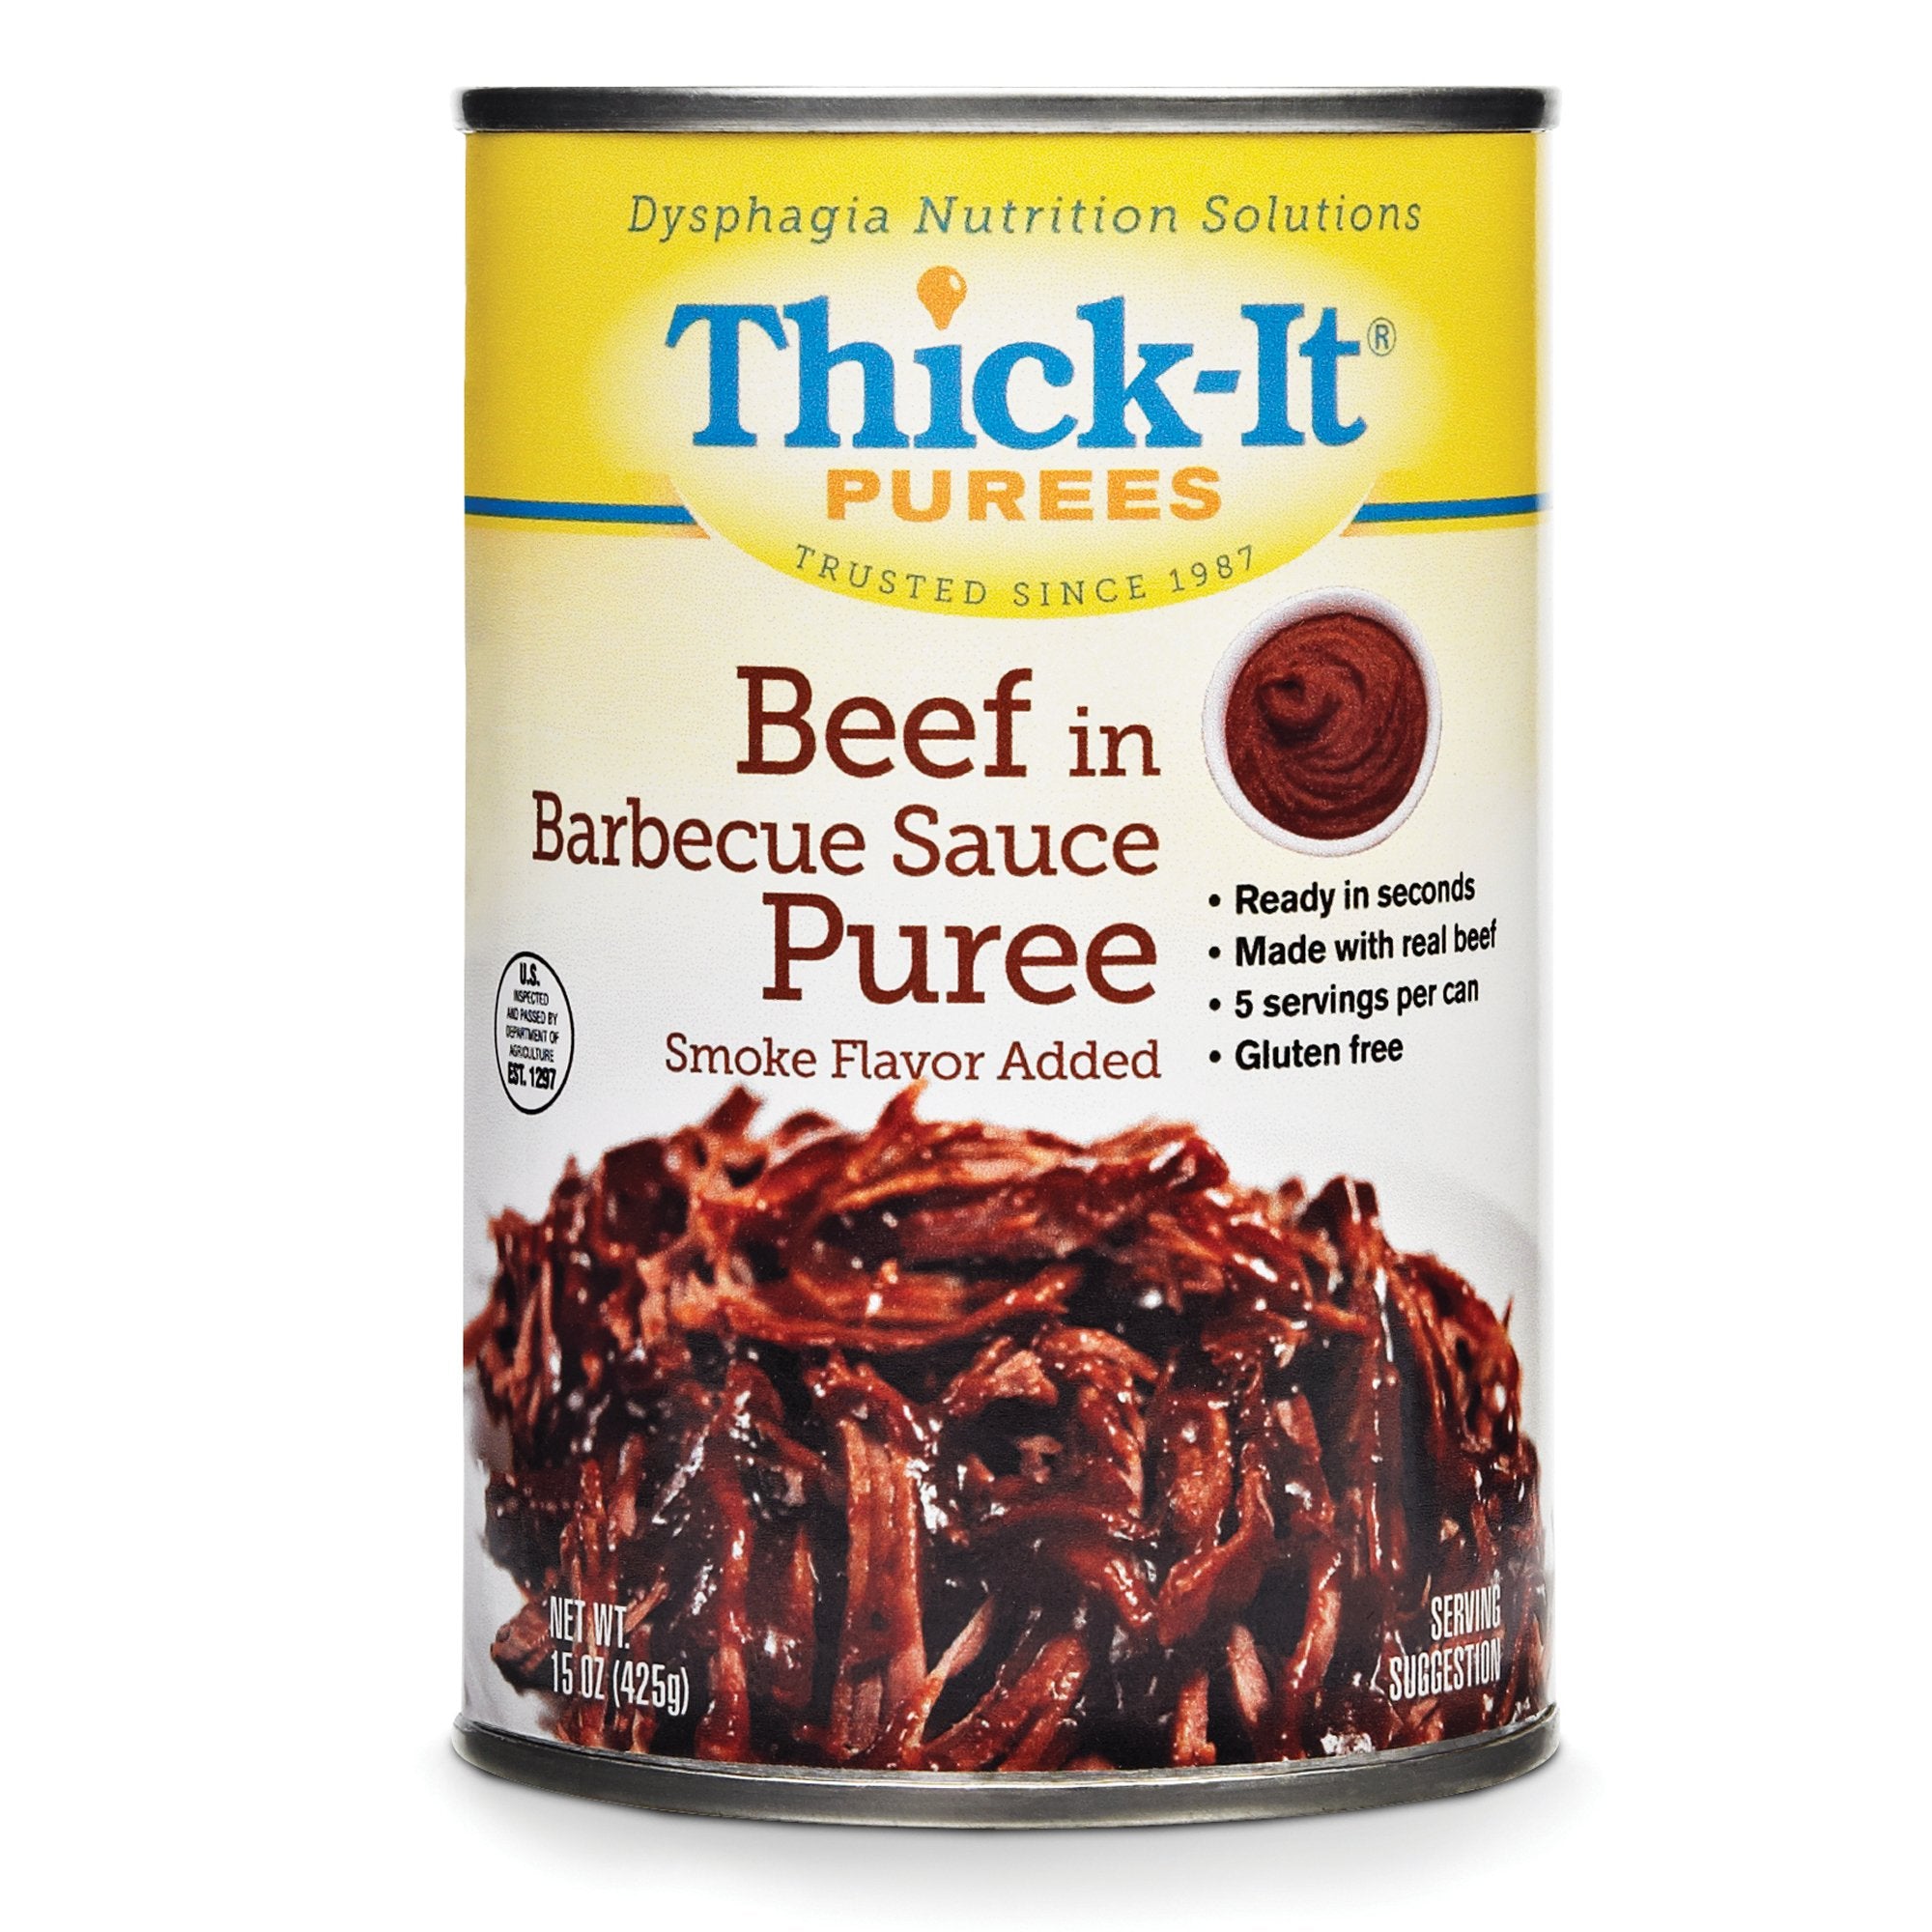 Thickened Food Thick-It 15 oz. Can Beef in BBQ Sauce Flavor Puree IDDSI Level 4 Extremely Thick/Pureed